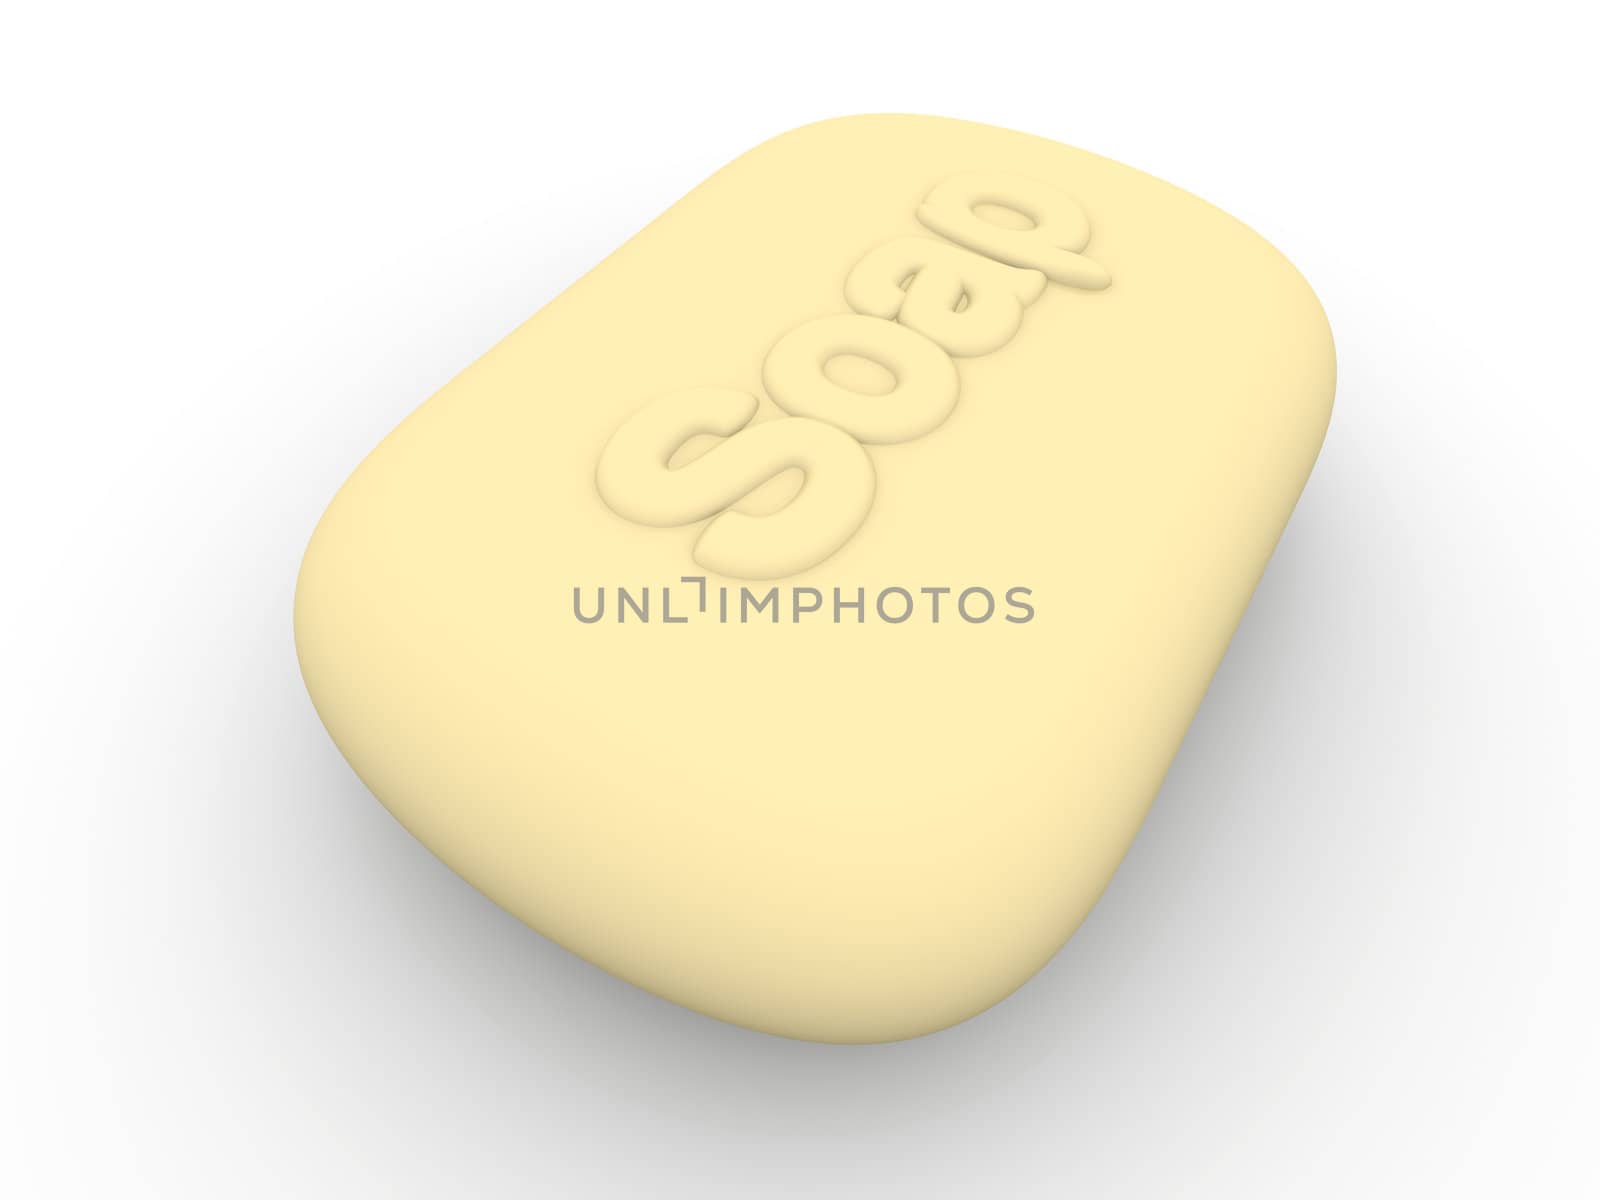 Soap by Spectral